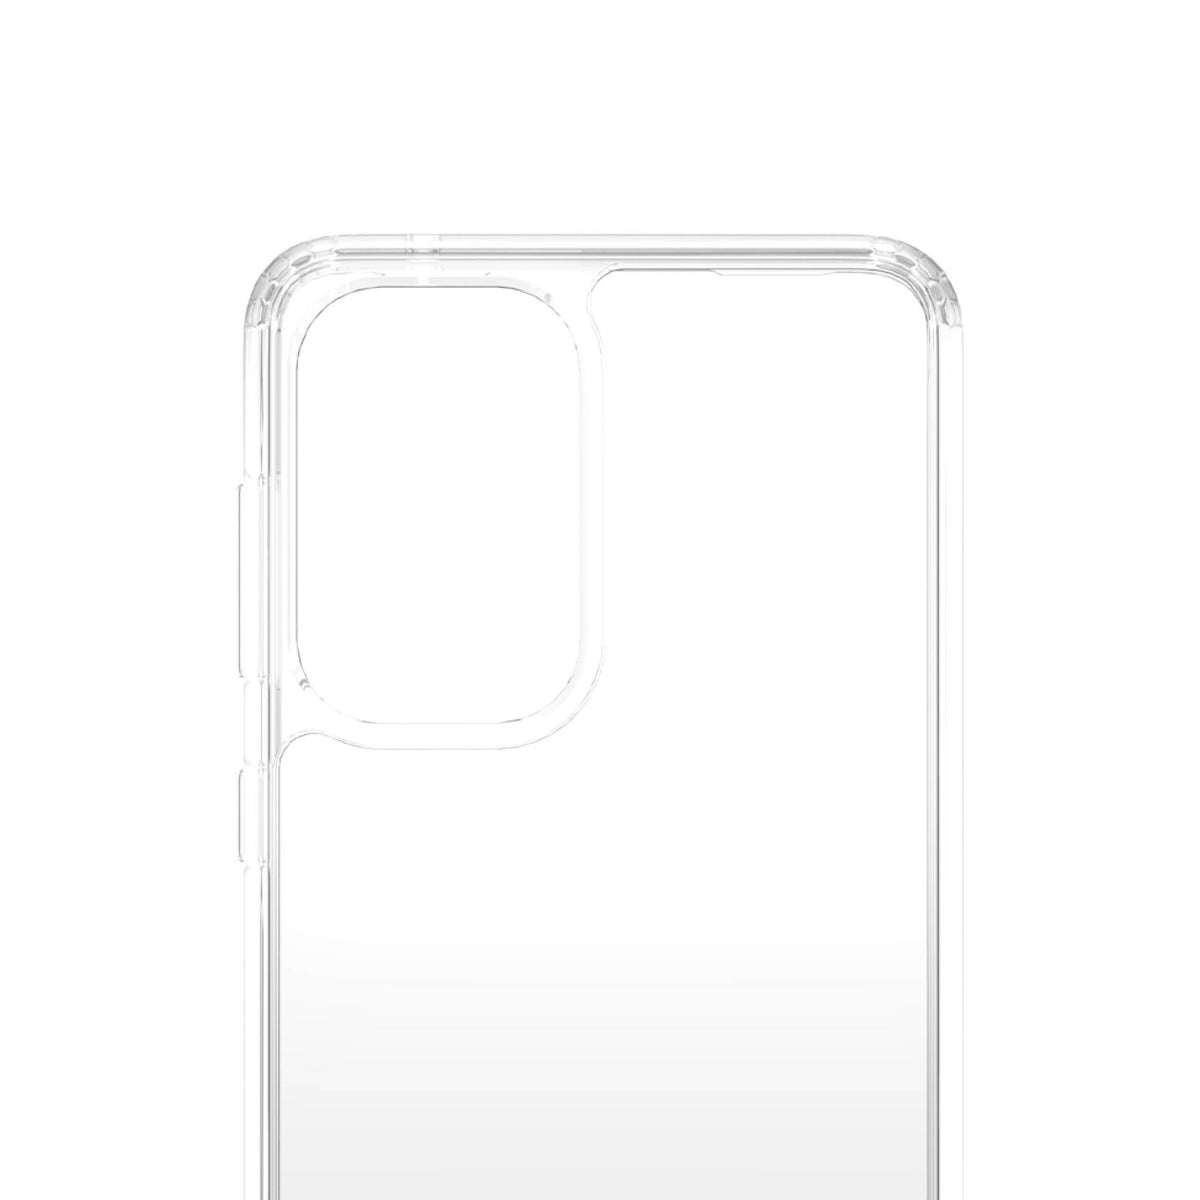 PanzerGlass ® HardCase for Galaxy A33 (5G) in Transparent